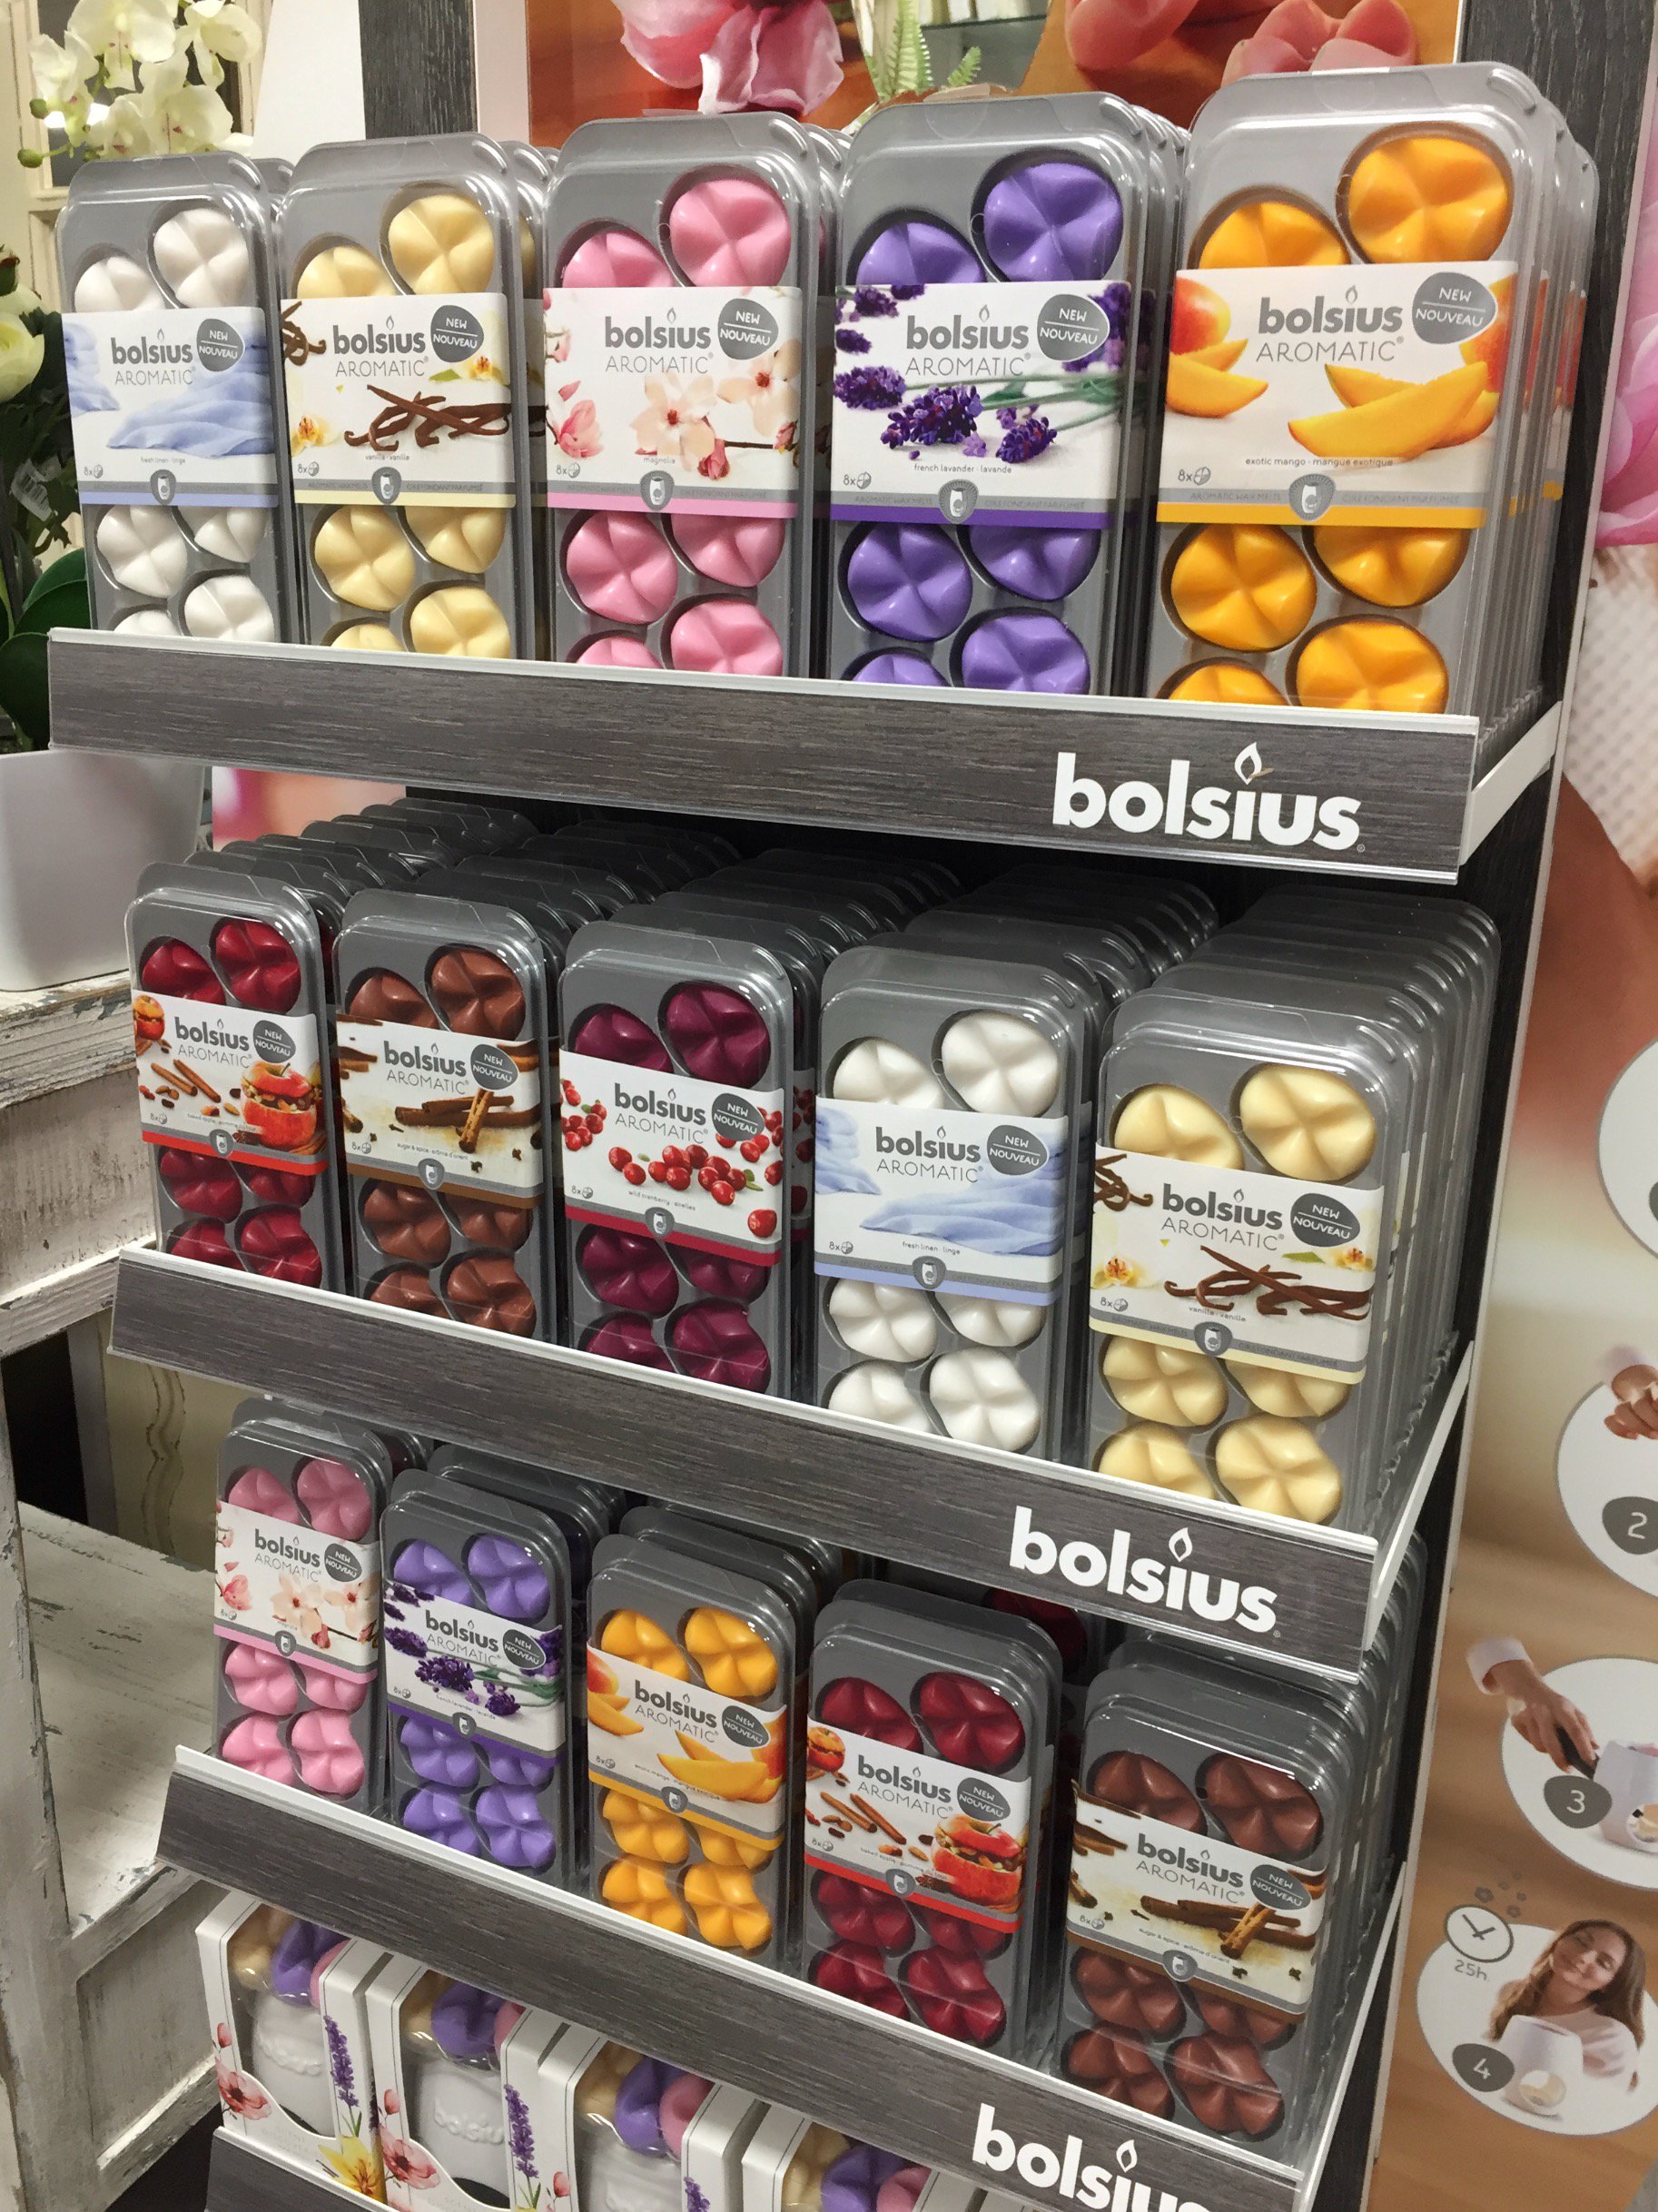 Whittingtons on Twitter: "We have expanded our Bolsius range and now also wax melts and There's a wonderful choice of fragrances to choose from, but which would you pick? 🕯